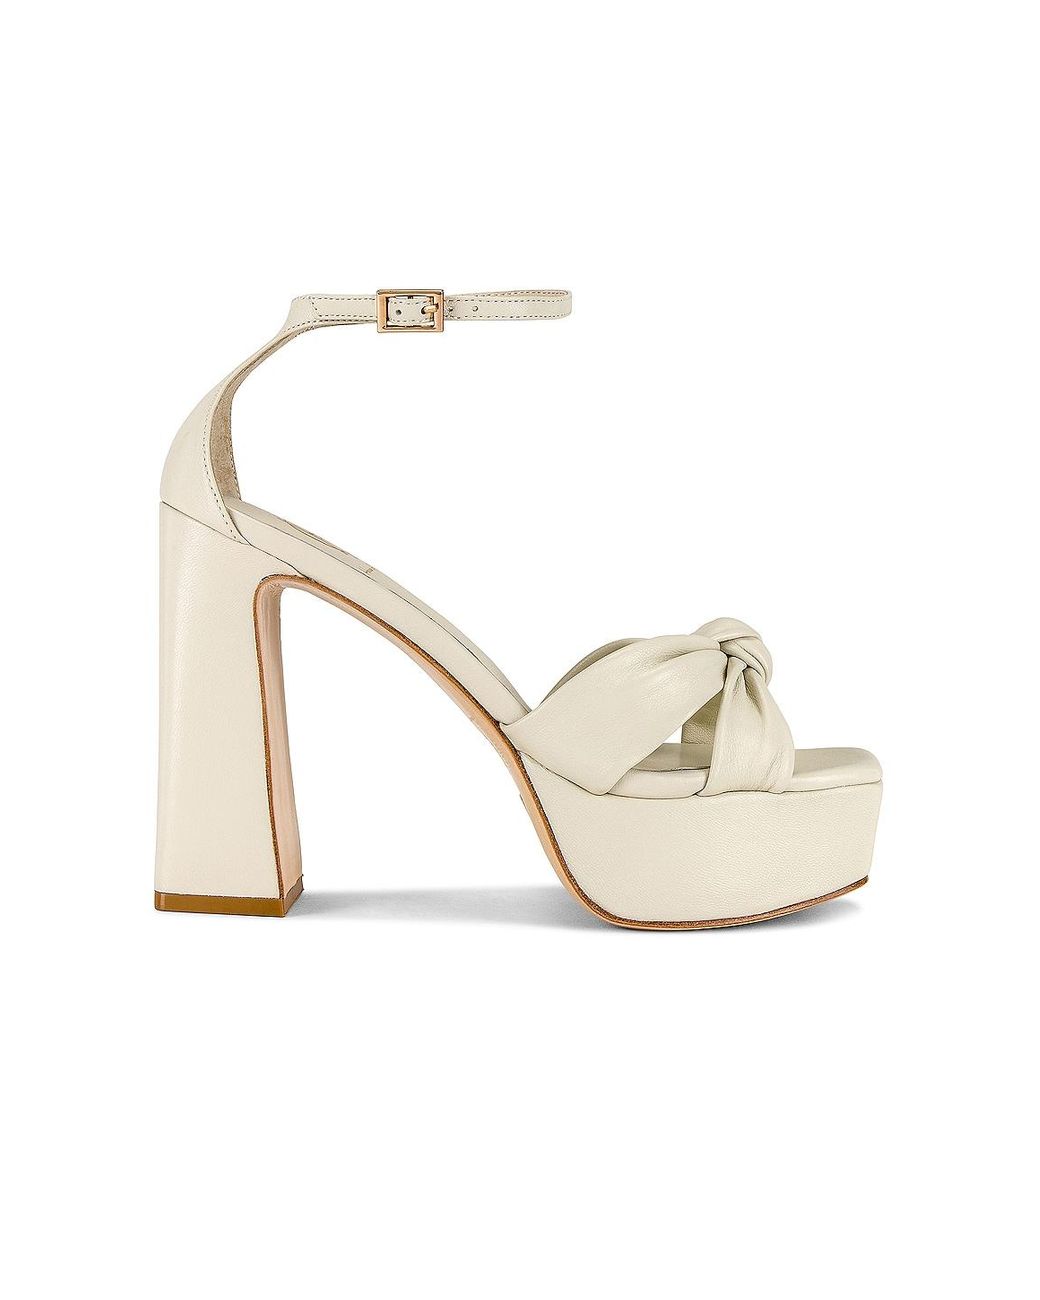 House of Harlow 1960 X Revolve Jin Platform in White | Lyst